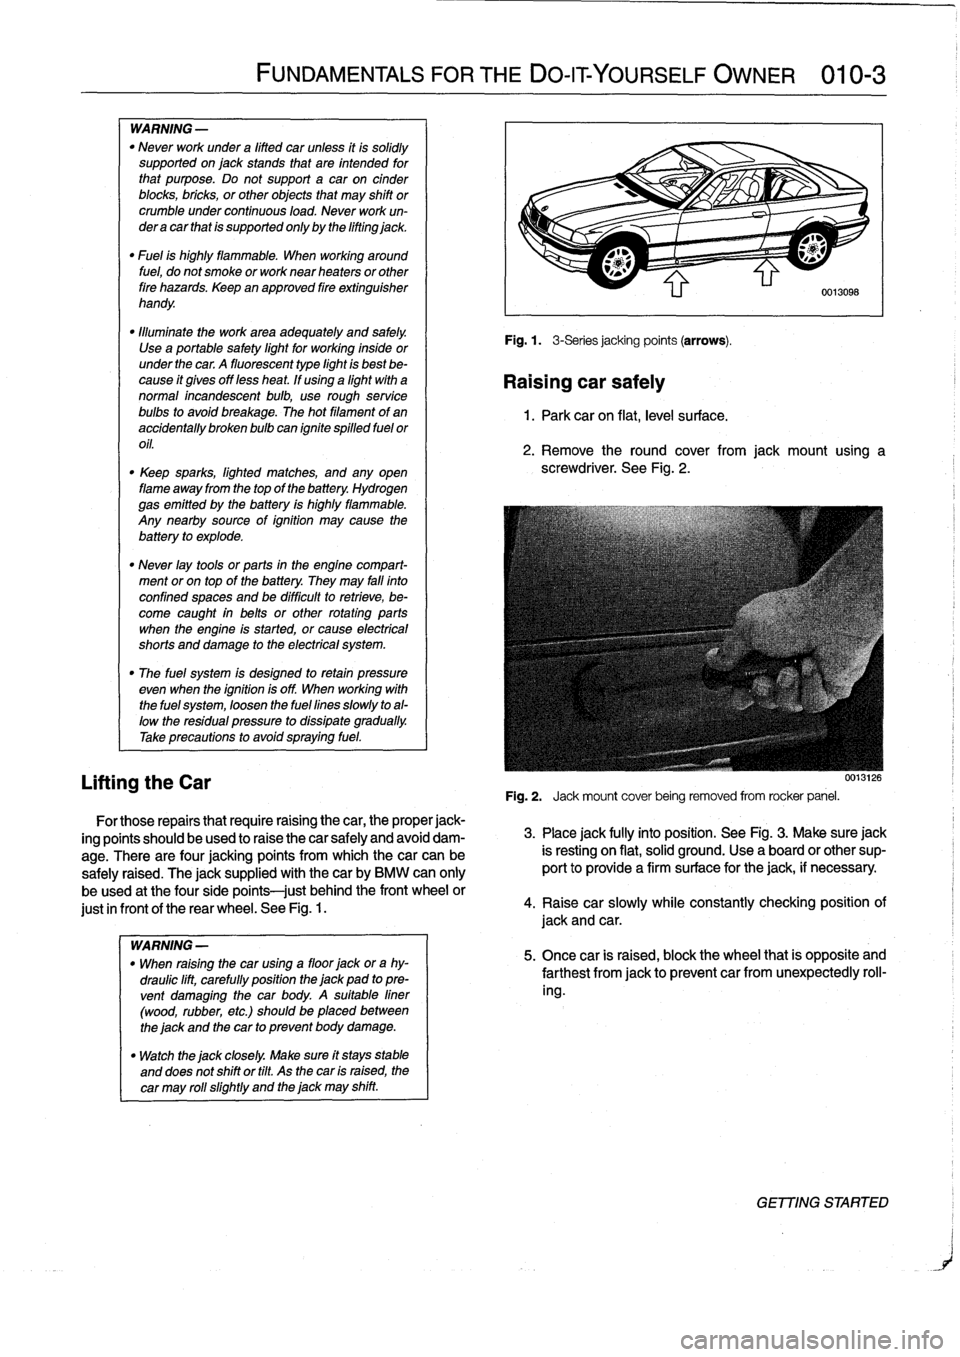 BMW 325i 1992 E36 Workshop Manual 
WARNING
-

"
Never
work
under
a
lifted
car
unless
it
is
solidly
supported
on
jack
stands
that
are
intended
for
that
purpose
.
Do
not
support
a
car
on
cinder
blocks,
bricks,
or
other
objects
that
may
